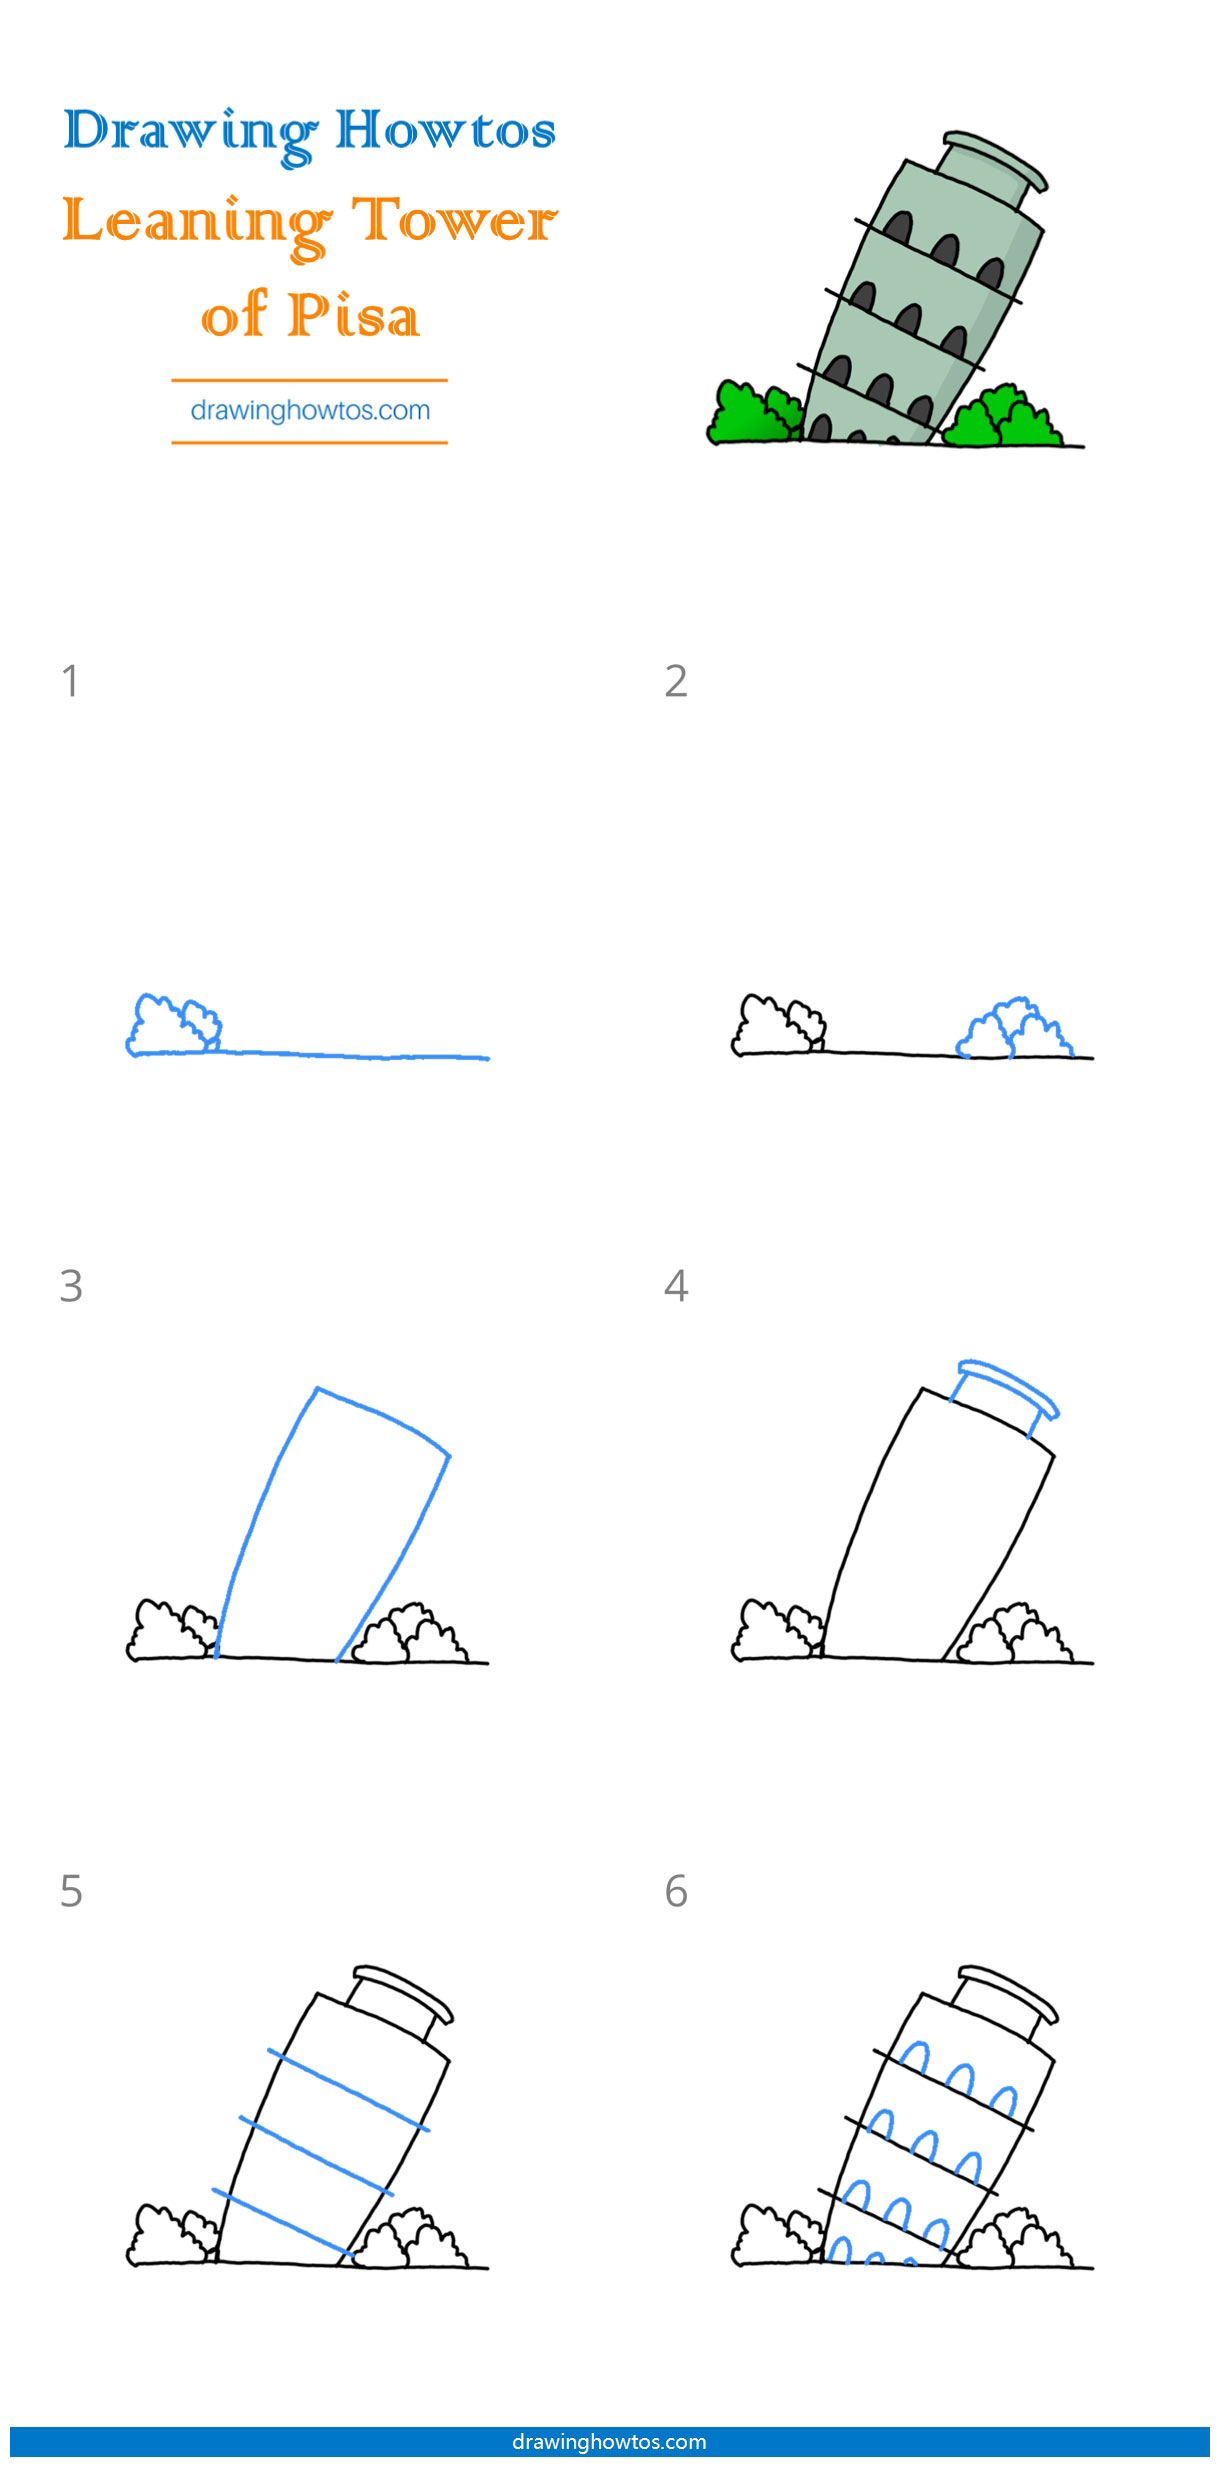 How to Draw the Leaning Tower of Pisa Step by Step